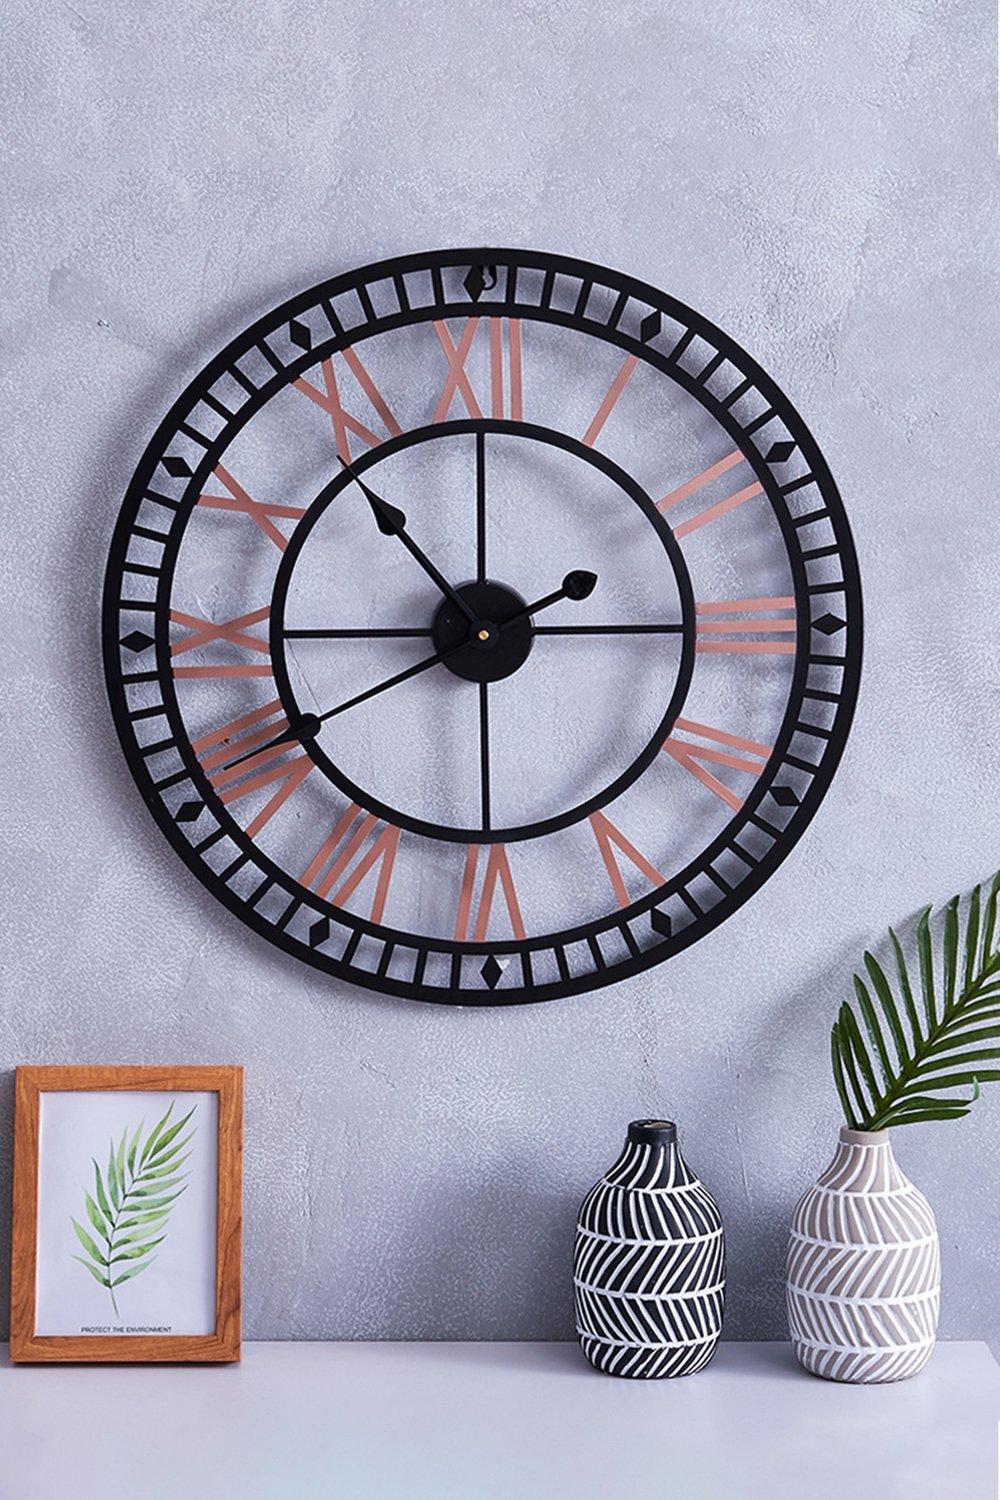 80cm Dia Black Frame Rose Roman Numeral Skeleton Wall Clock with 60 Scale